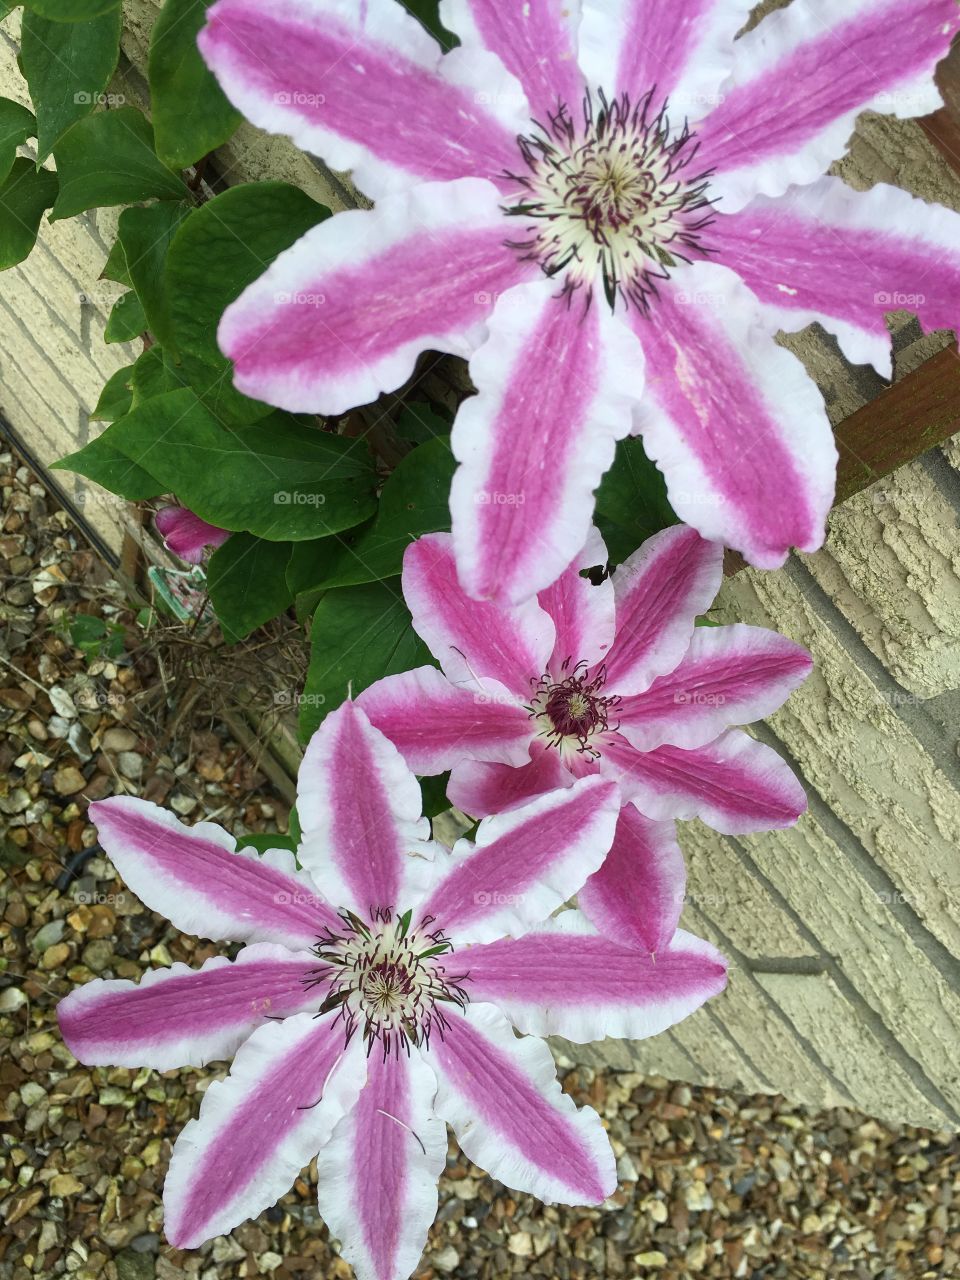 Close up view of striking pink and white clematis flowers from climbing plant growing up a wall of the house